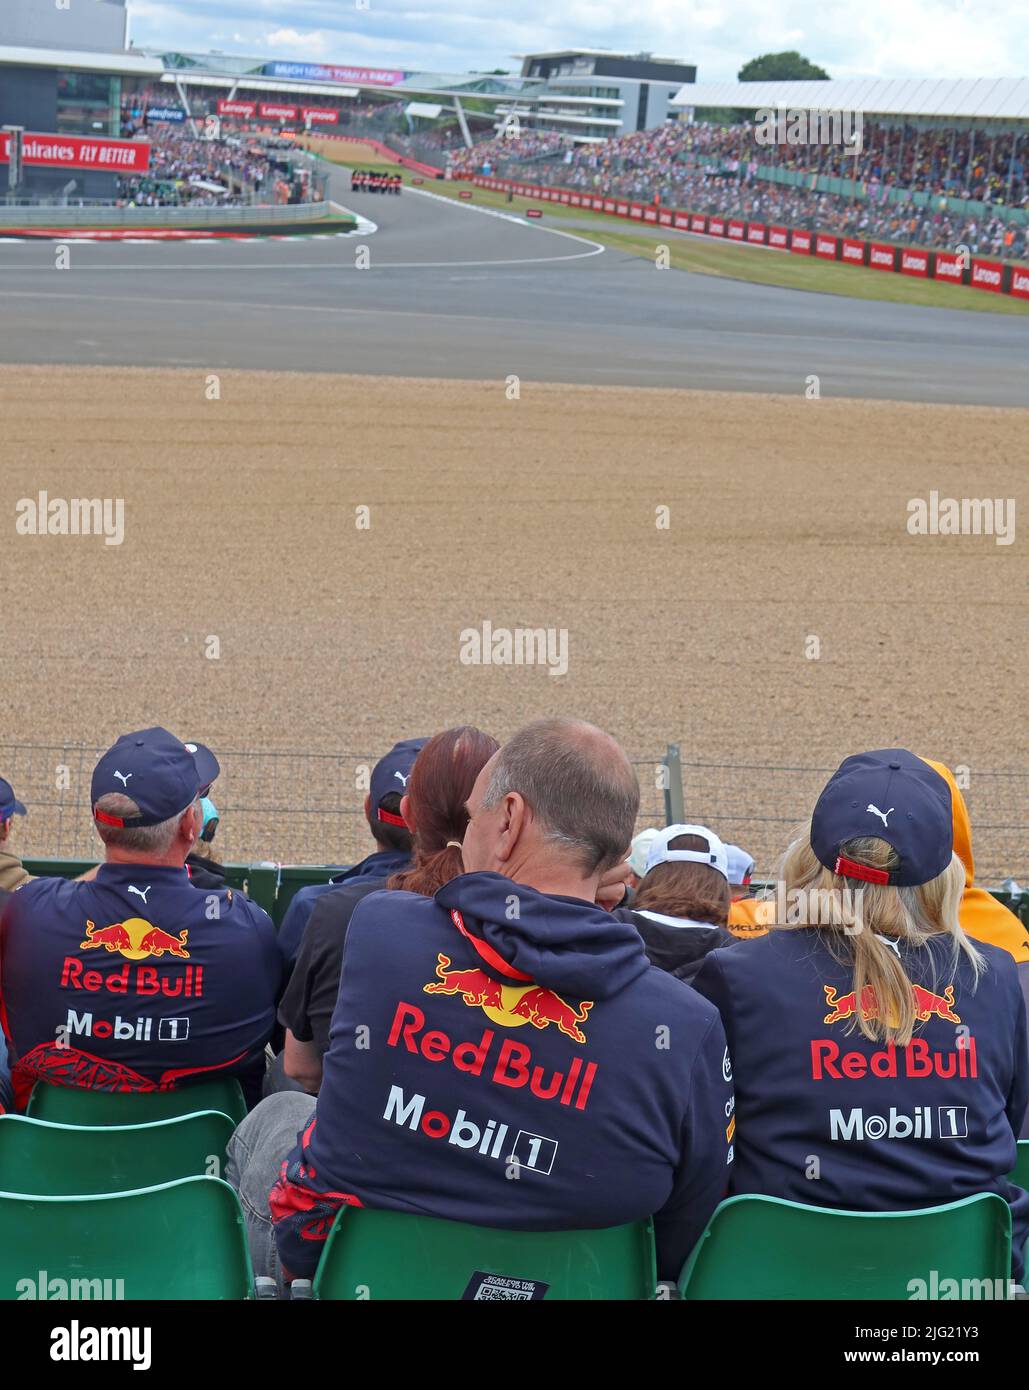 Red Bull Racing, fans au circuit Silverstone pour le Grand Prix F1 2022, Silverstone,Towcester, Northamptonshire,Angleterre,Royaume-Uni,NN12 8T Banque D'Images